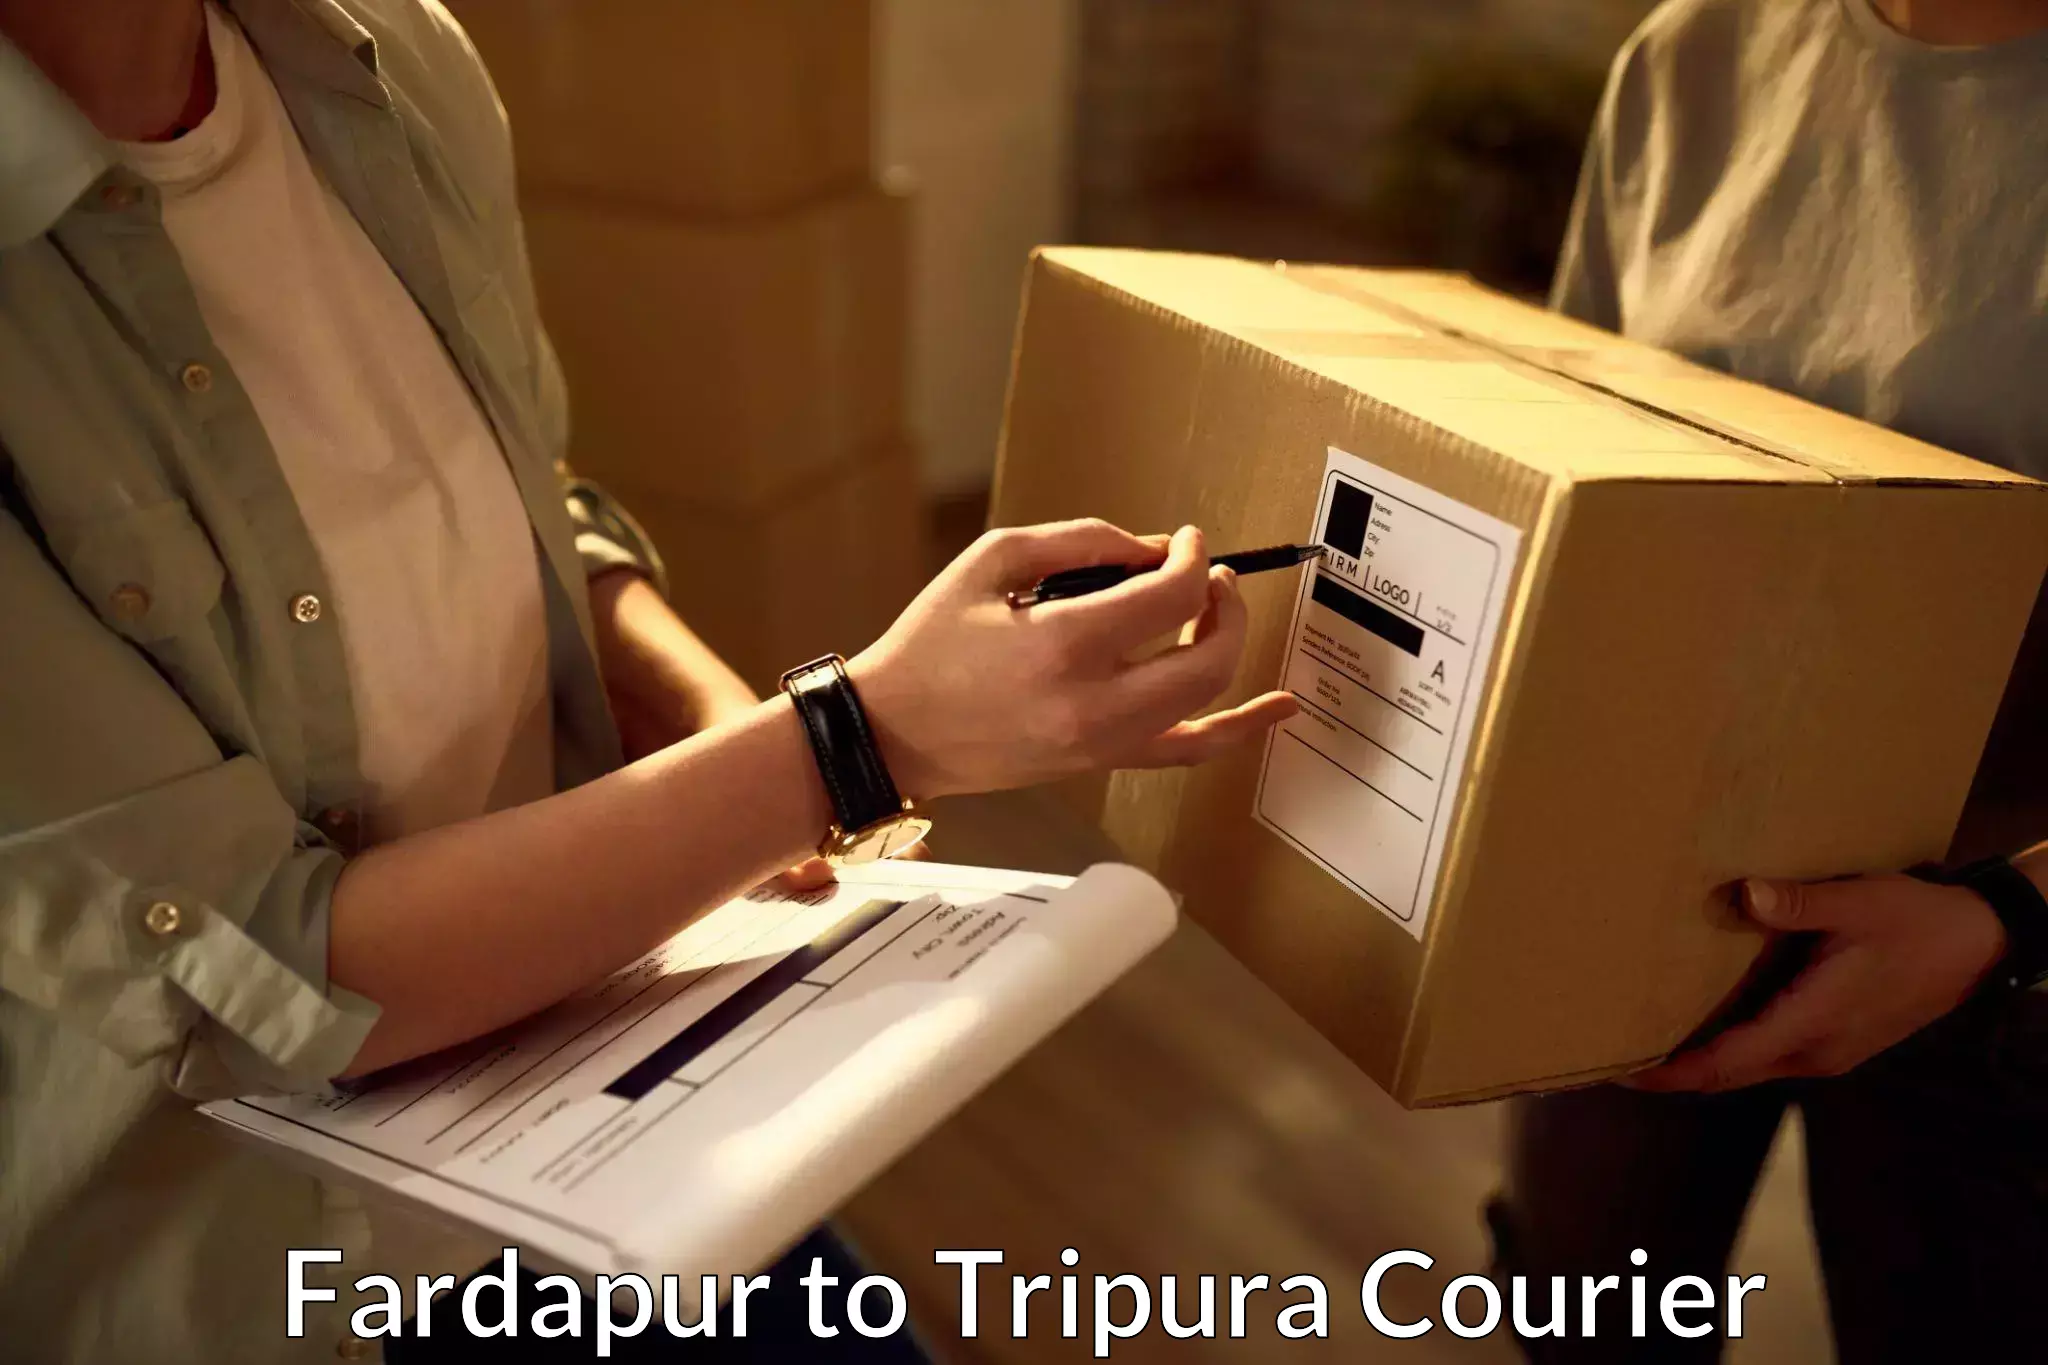 Express package delivery in Fardapur to Udaipur Tripura